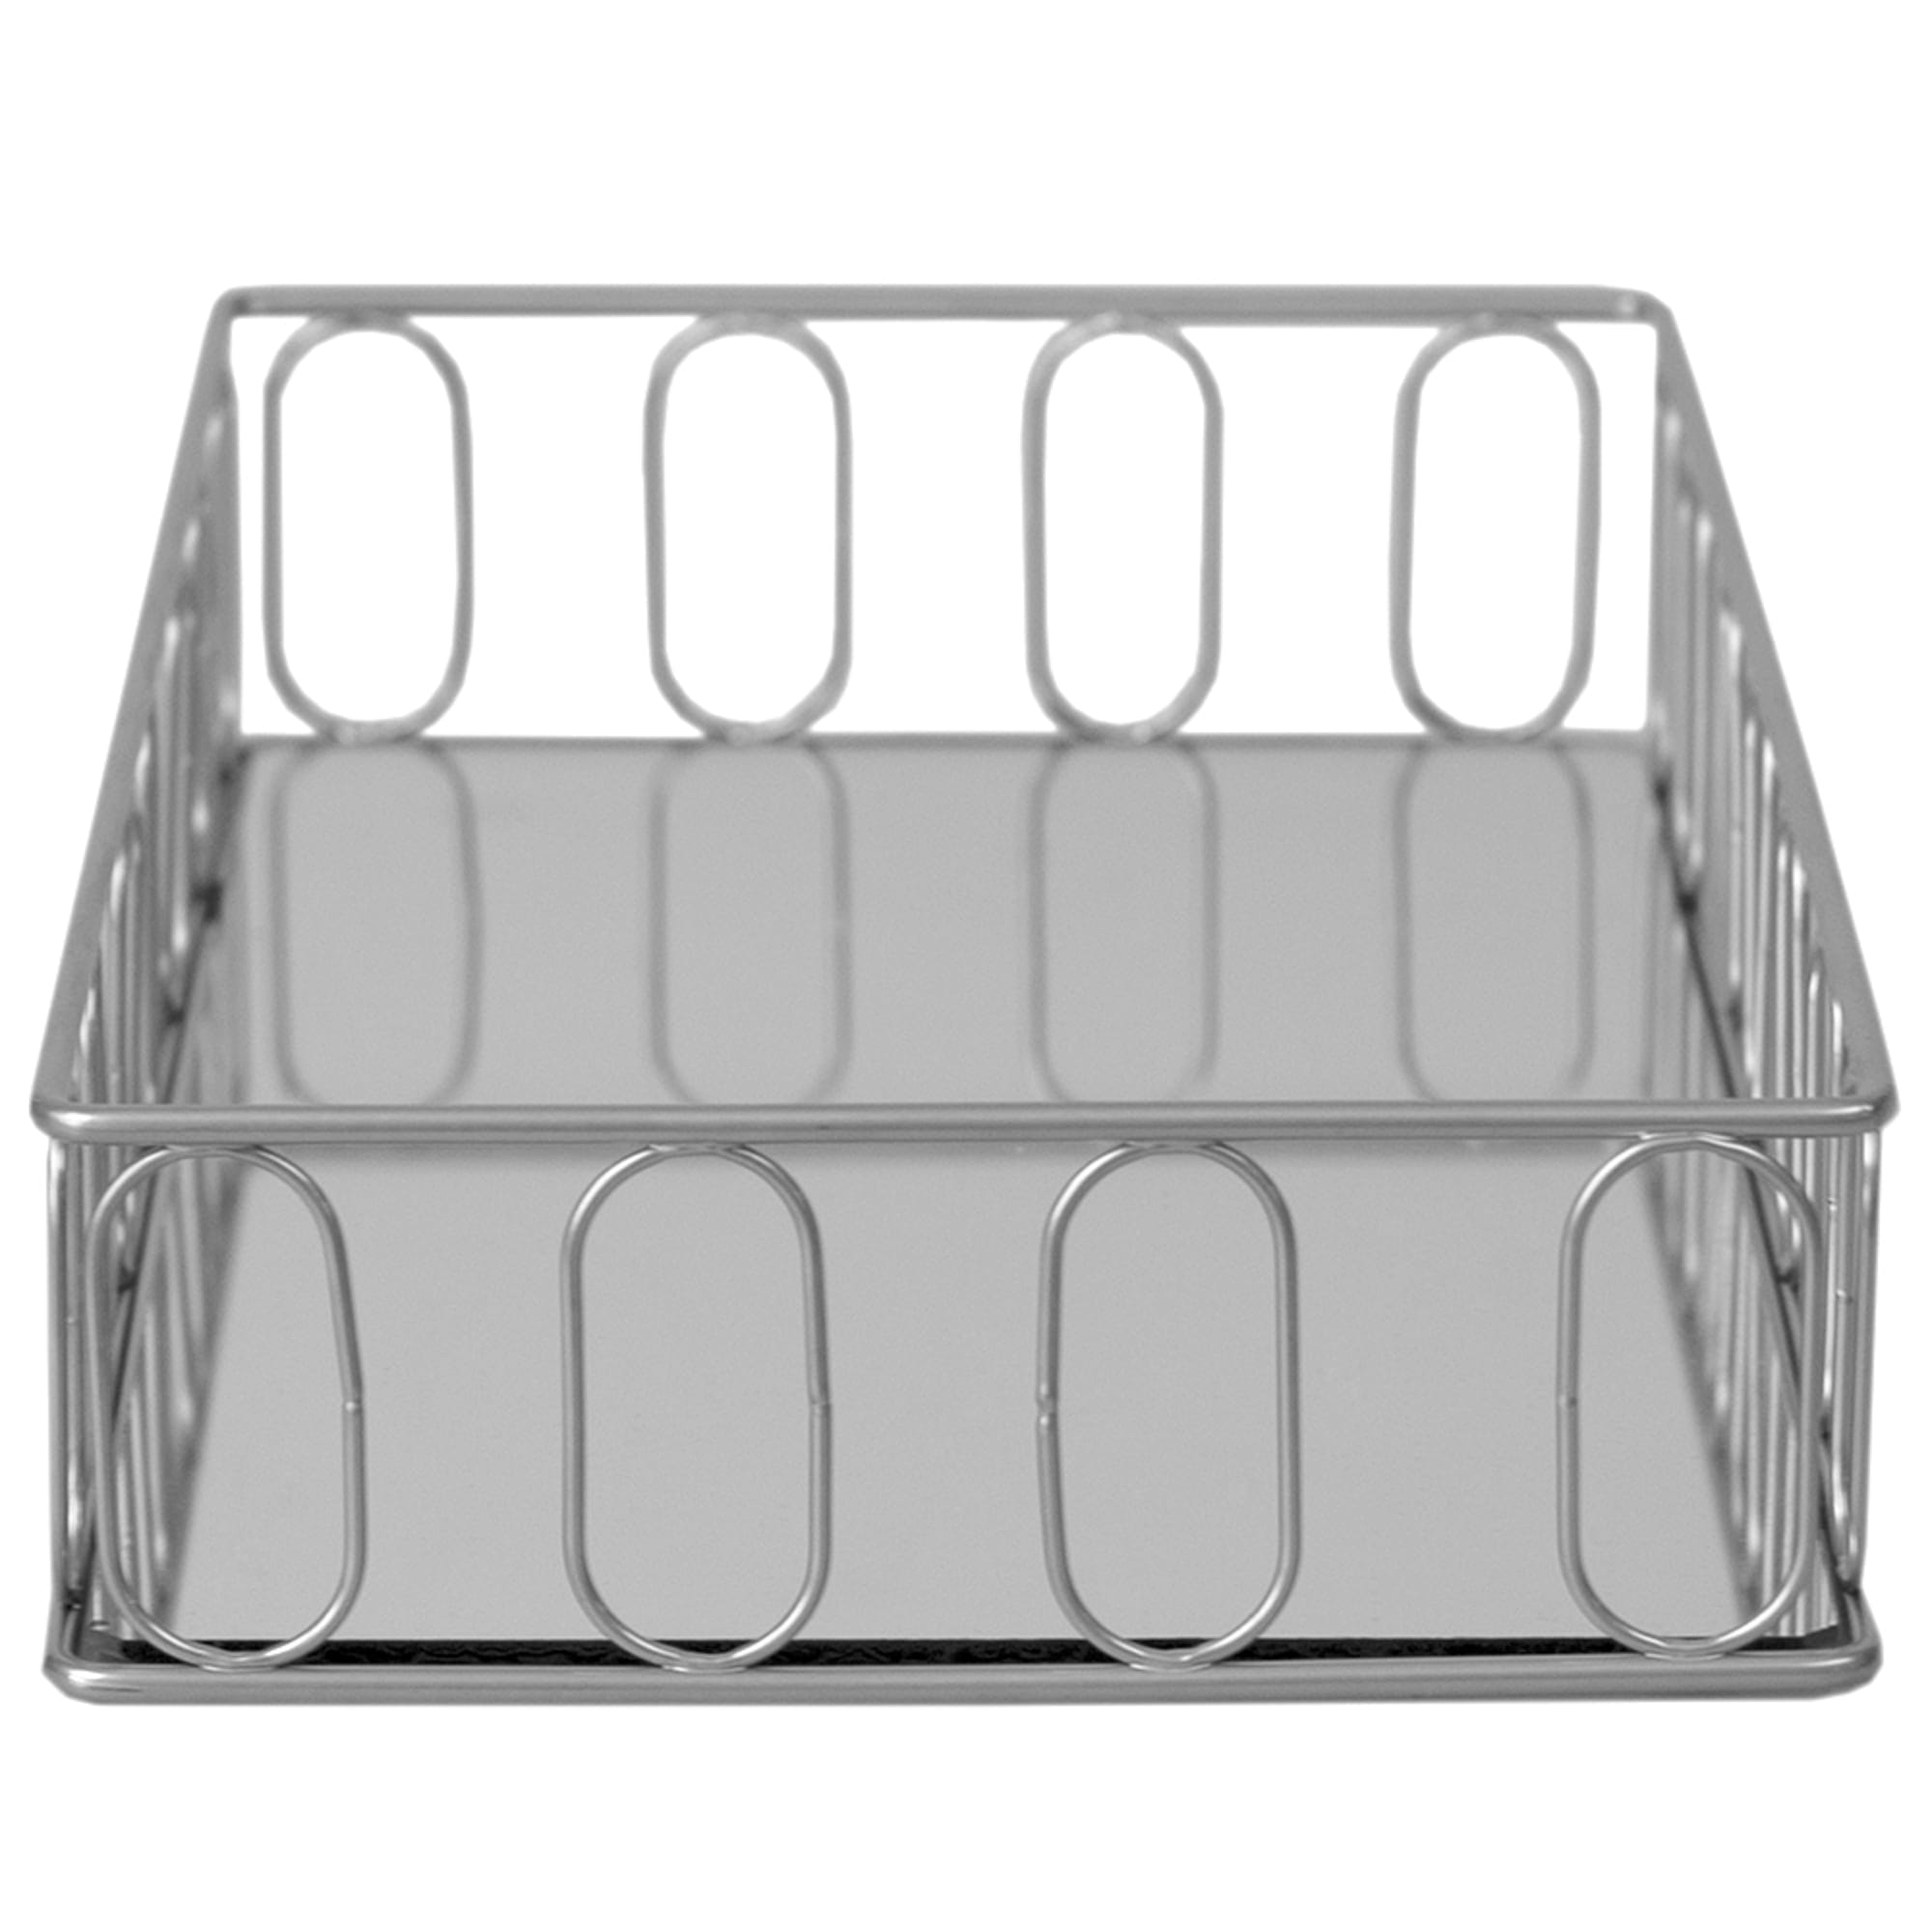 Home Basics Unity Mirrored Vanity Tray, Silver $10 EACH, CASE PACK OF 6